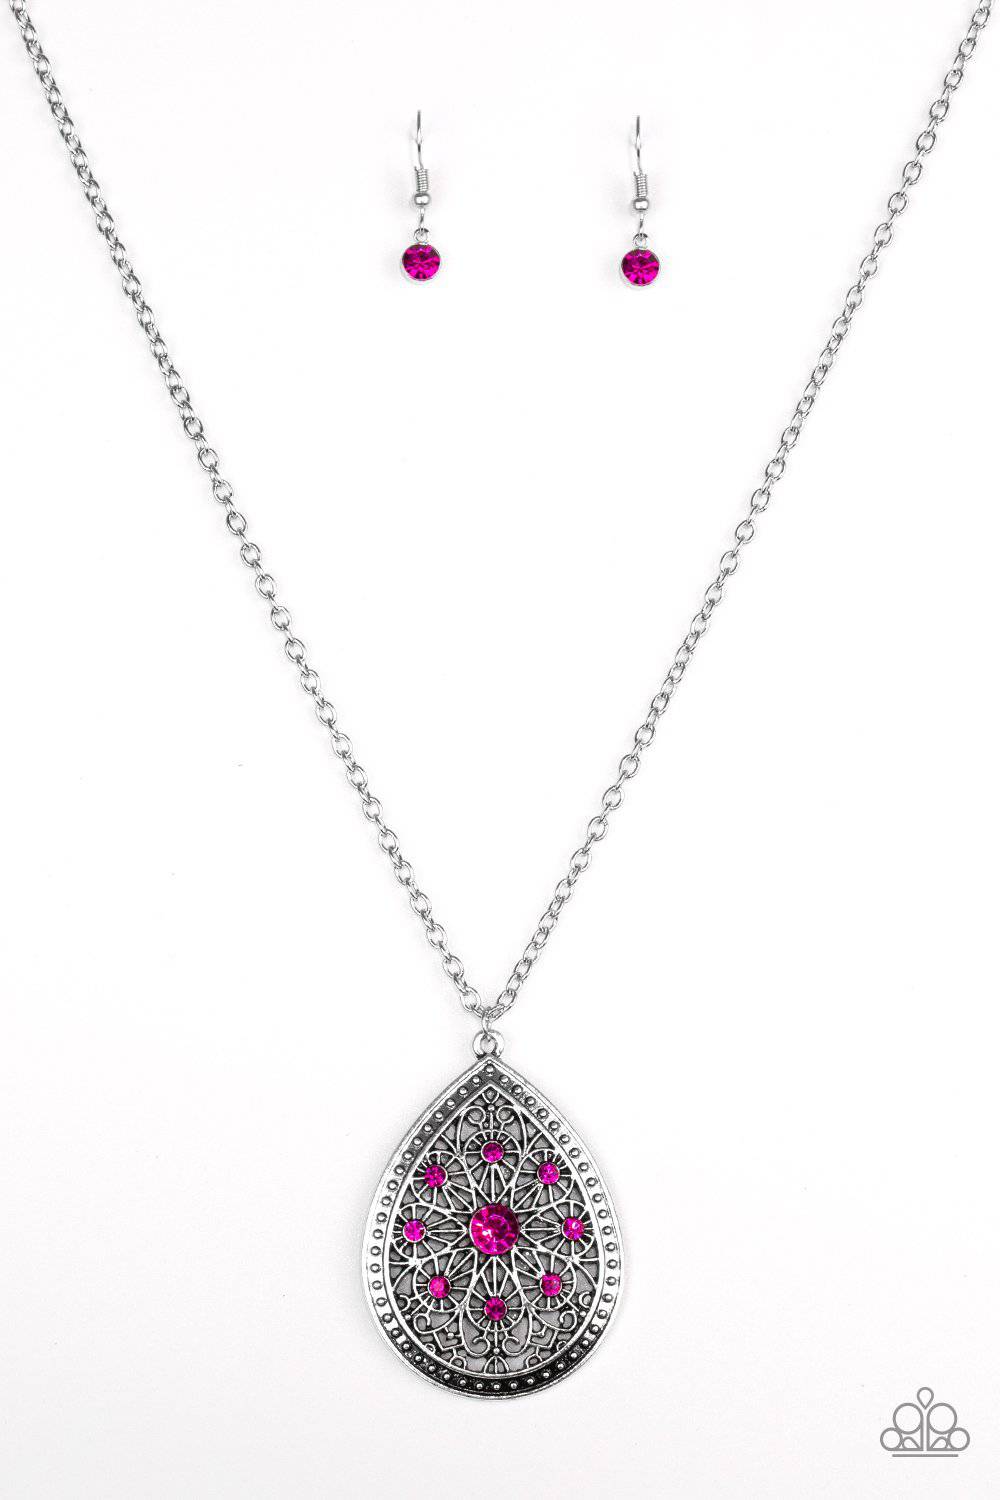 A68 - I am Queen Pink Necklace by Paparazzi Accessories on Fancy5Fashion.com